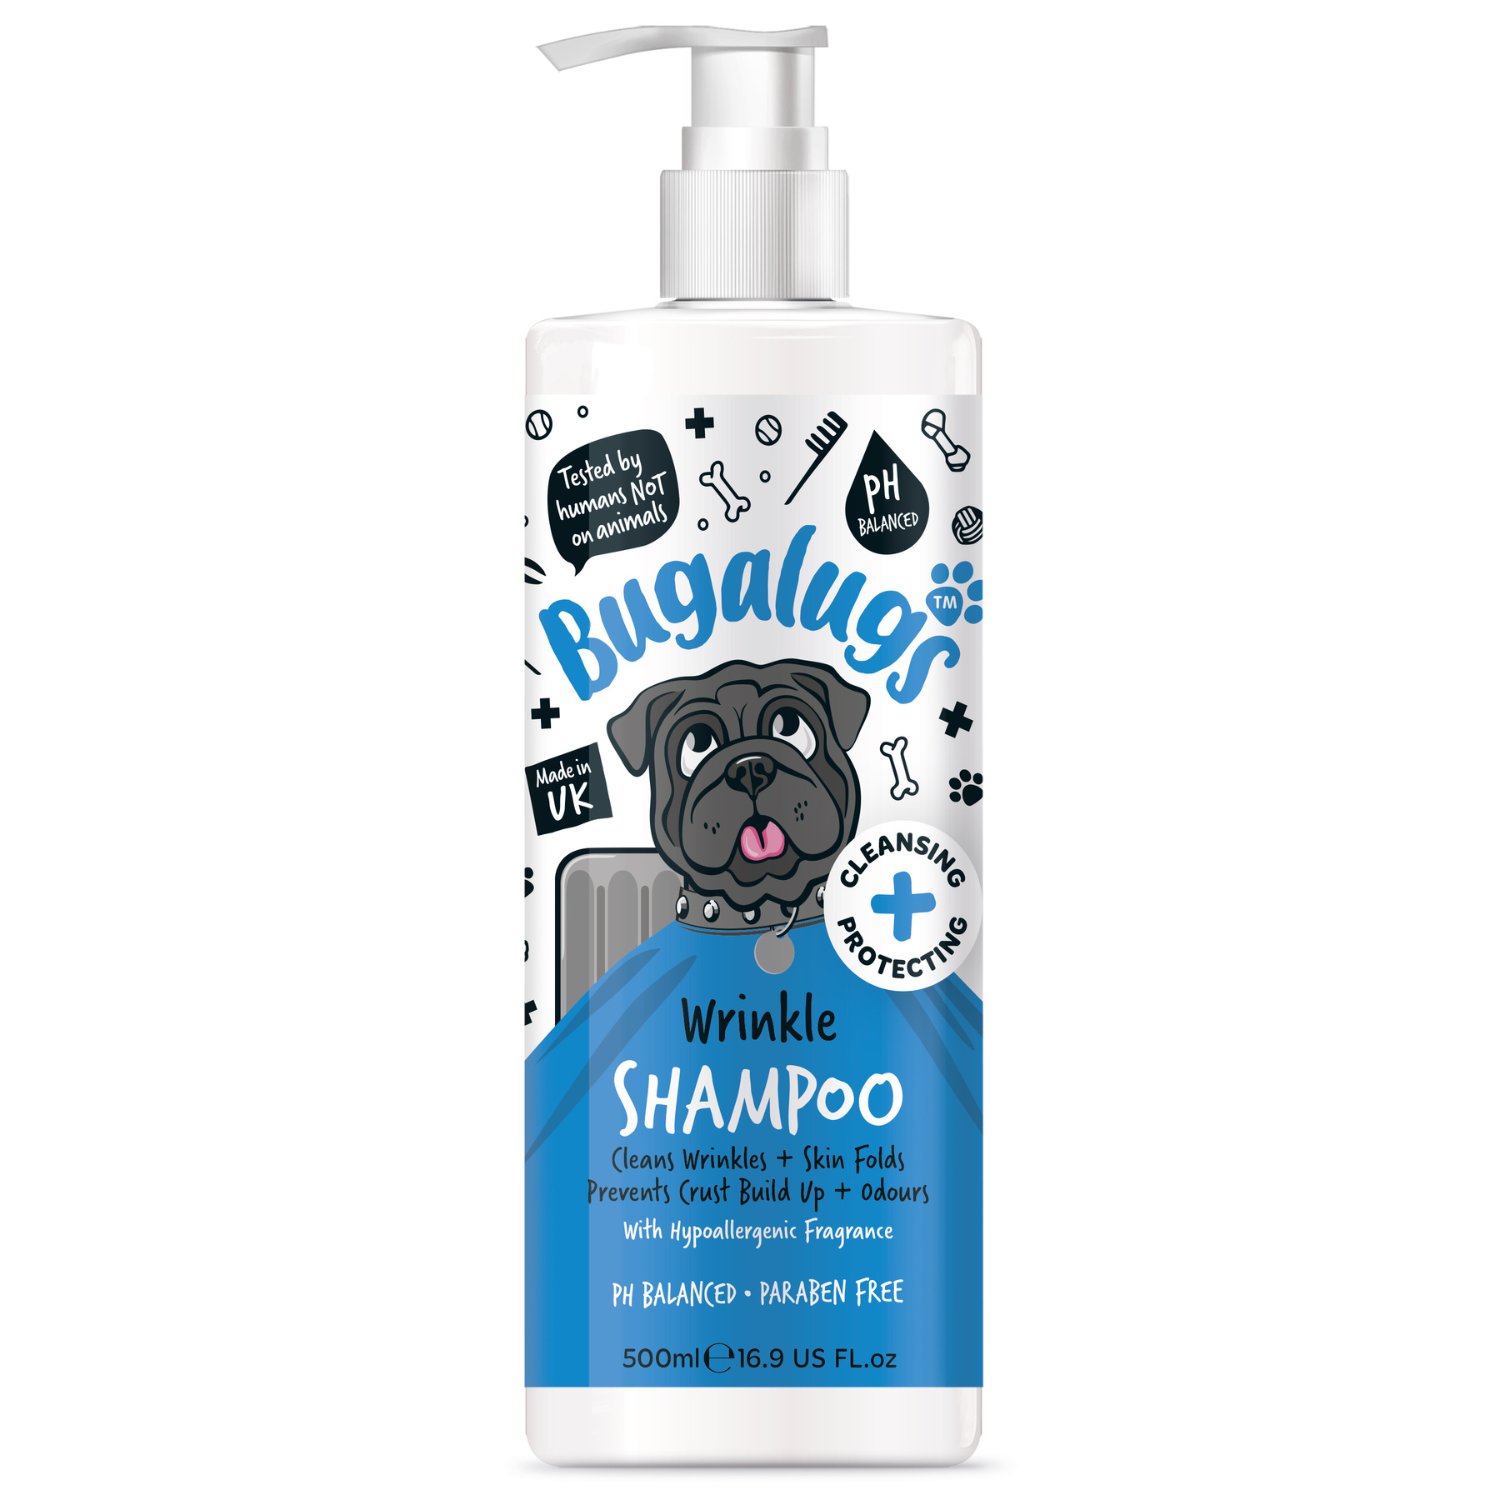 Bugalugs Wrinkle Shampoo with Hypoallergenic Fragrance for Dogs and Cats